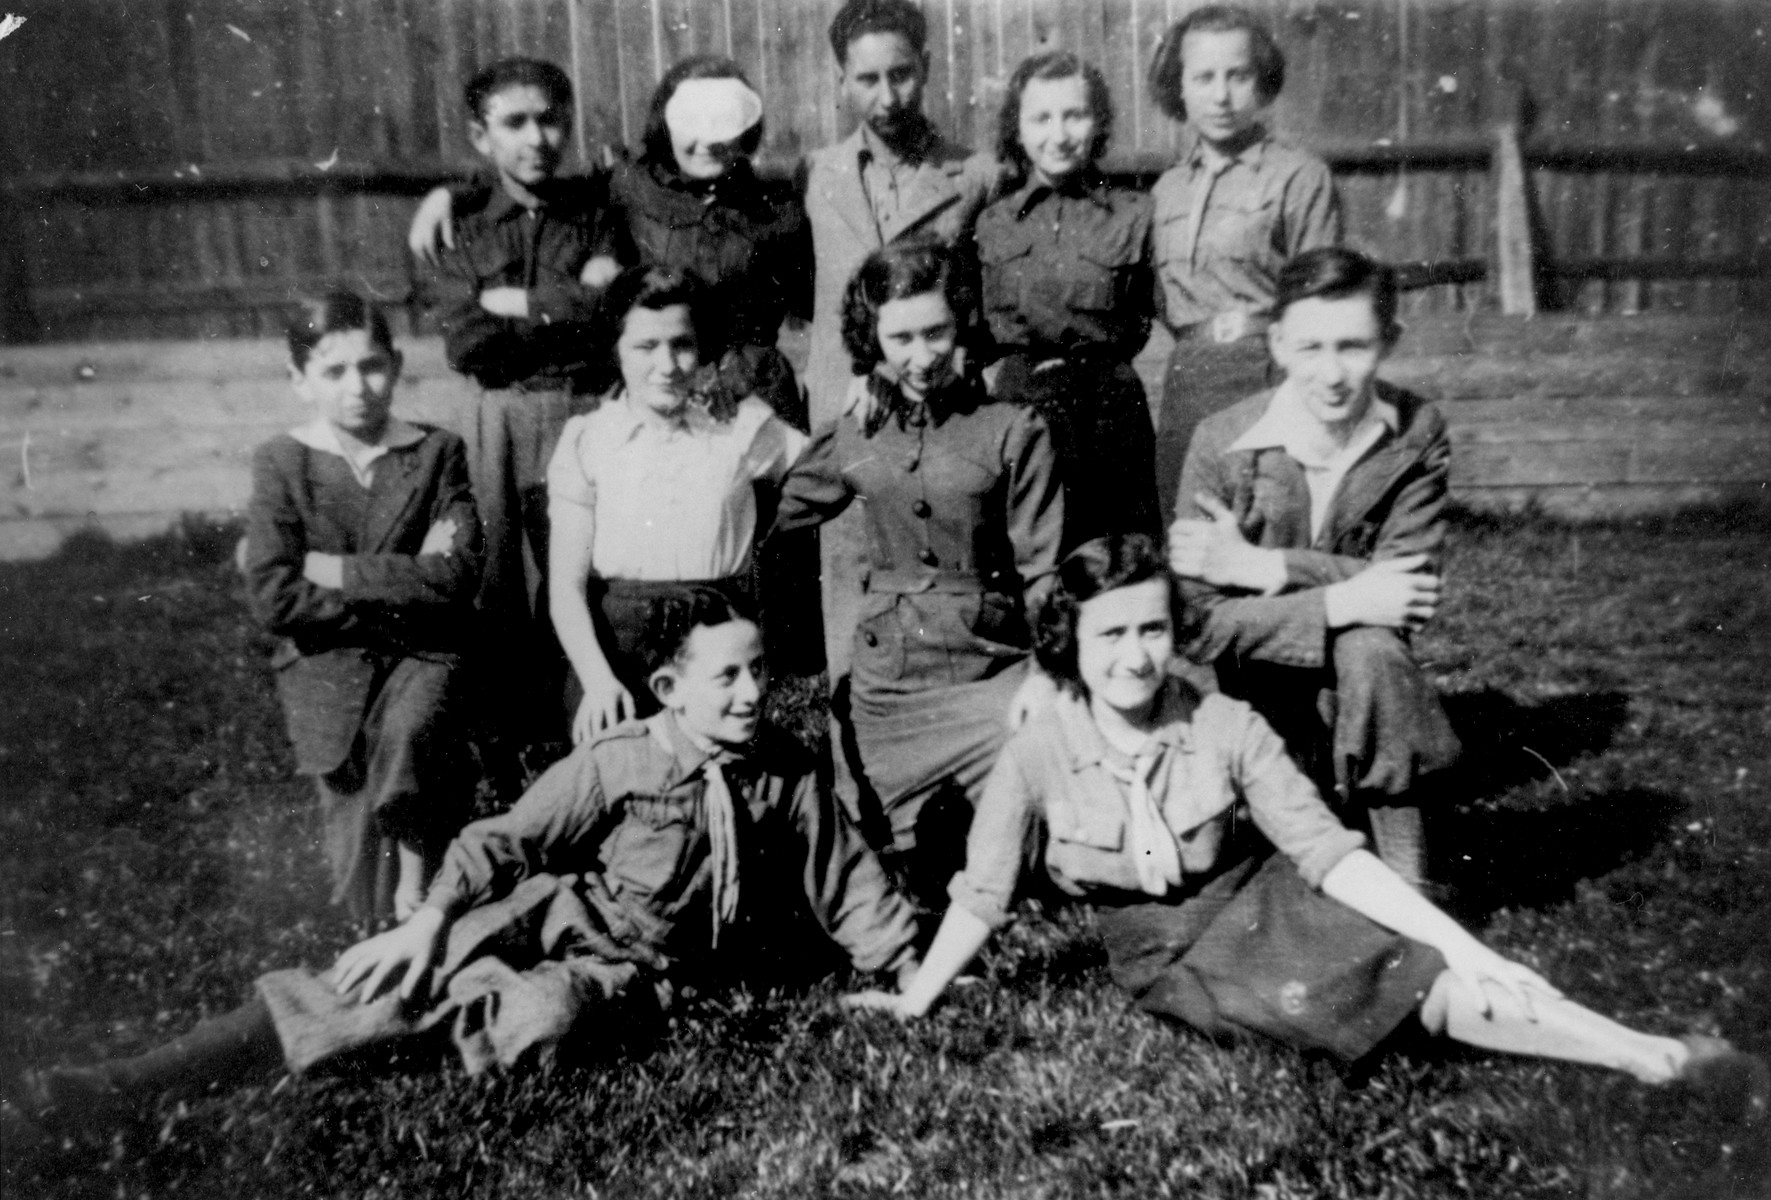 Group portrait of members of the Hanoar Hatzioni Zionist youth movement in Bedzin.

Among those pictured are: Abramek Szyjewicz (front row, left), Tova Faska (front row, right), and Rozia Londner (second row, second from the right).